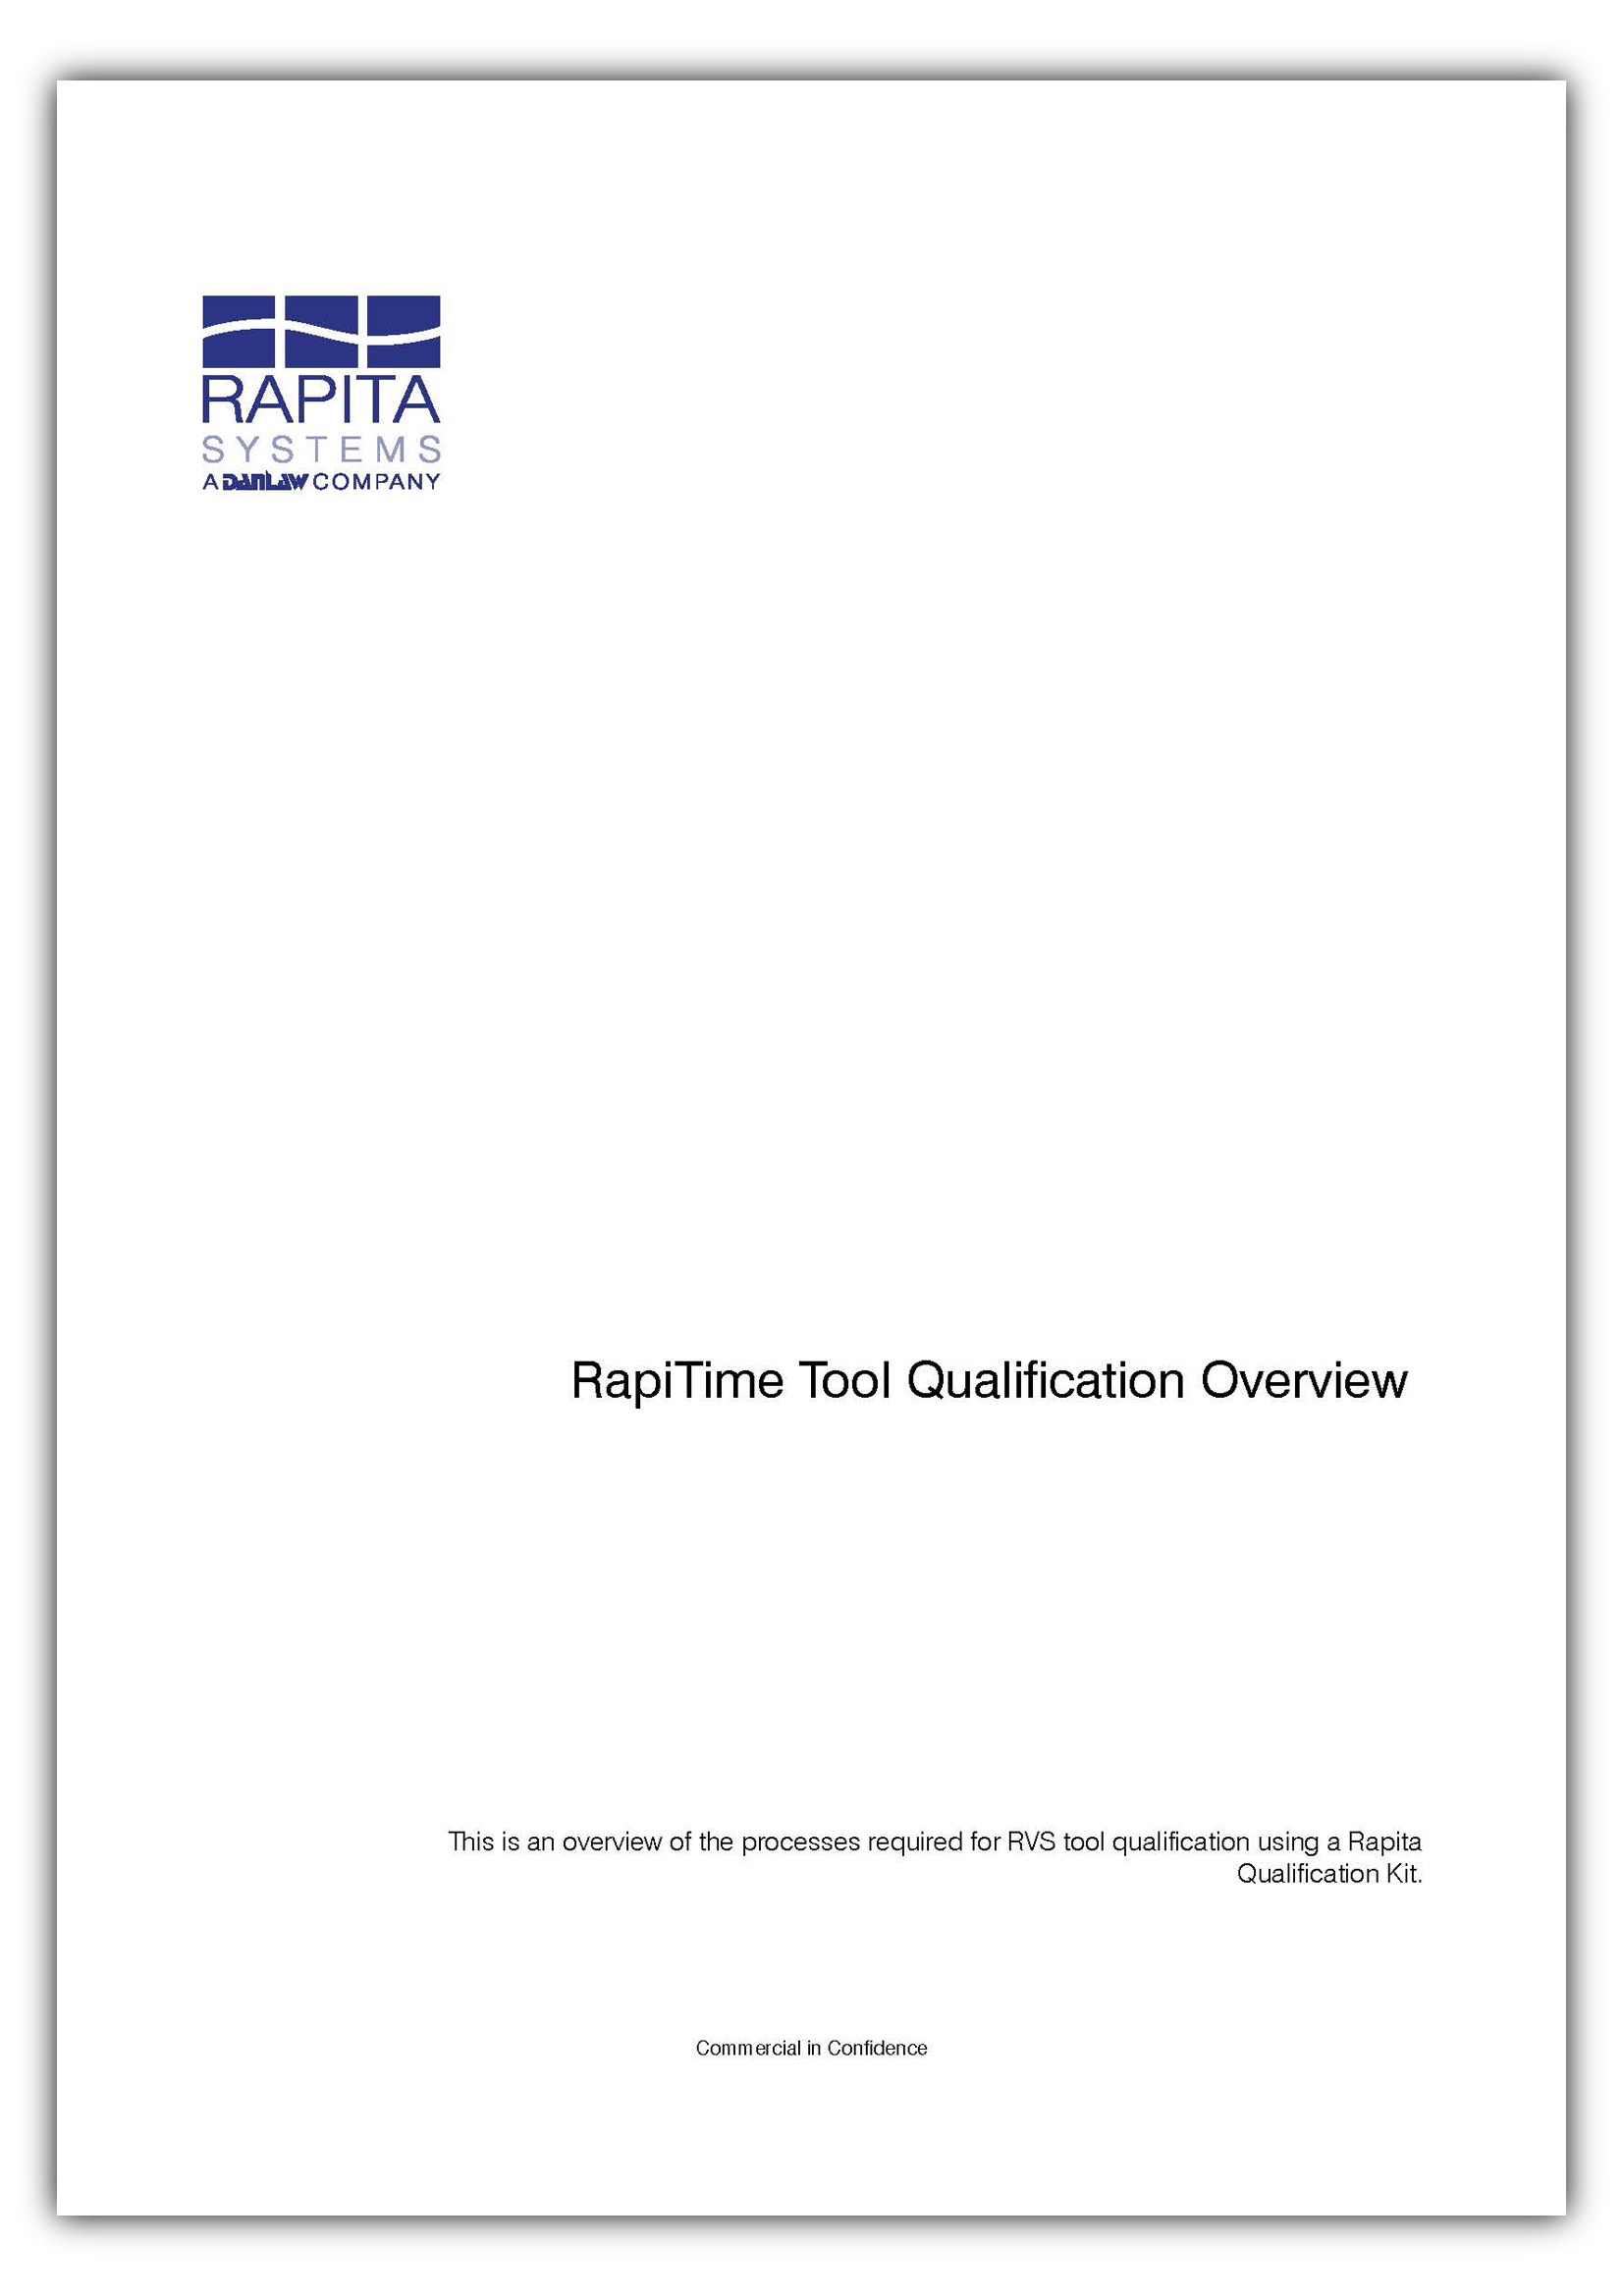 Front page of the Qualification Kit document for RapiTime